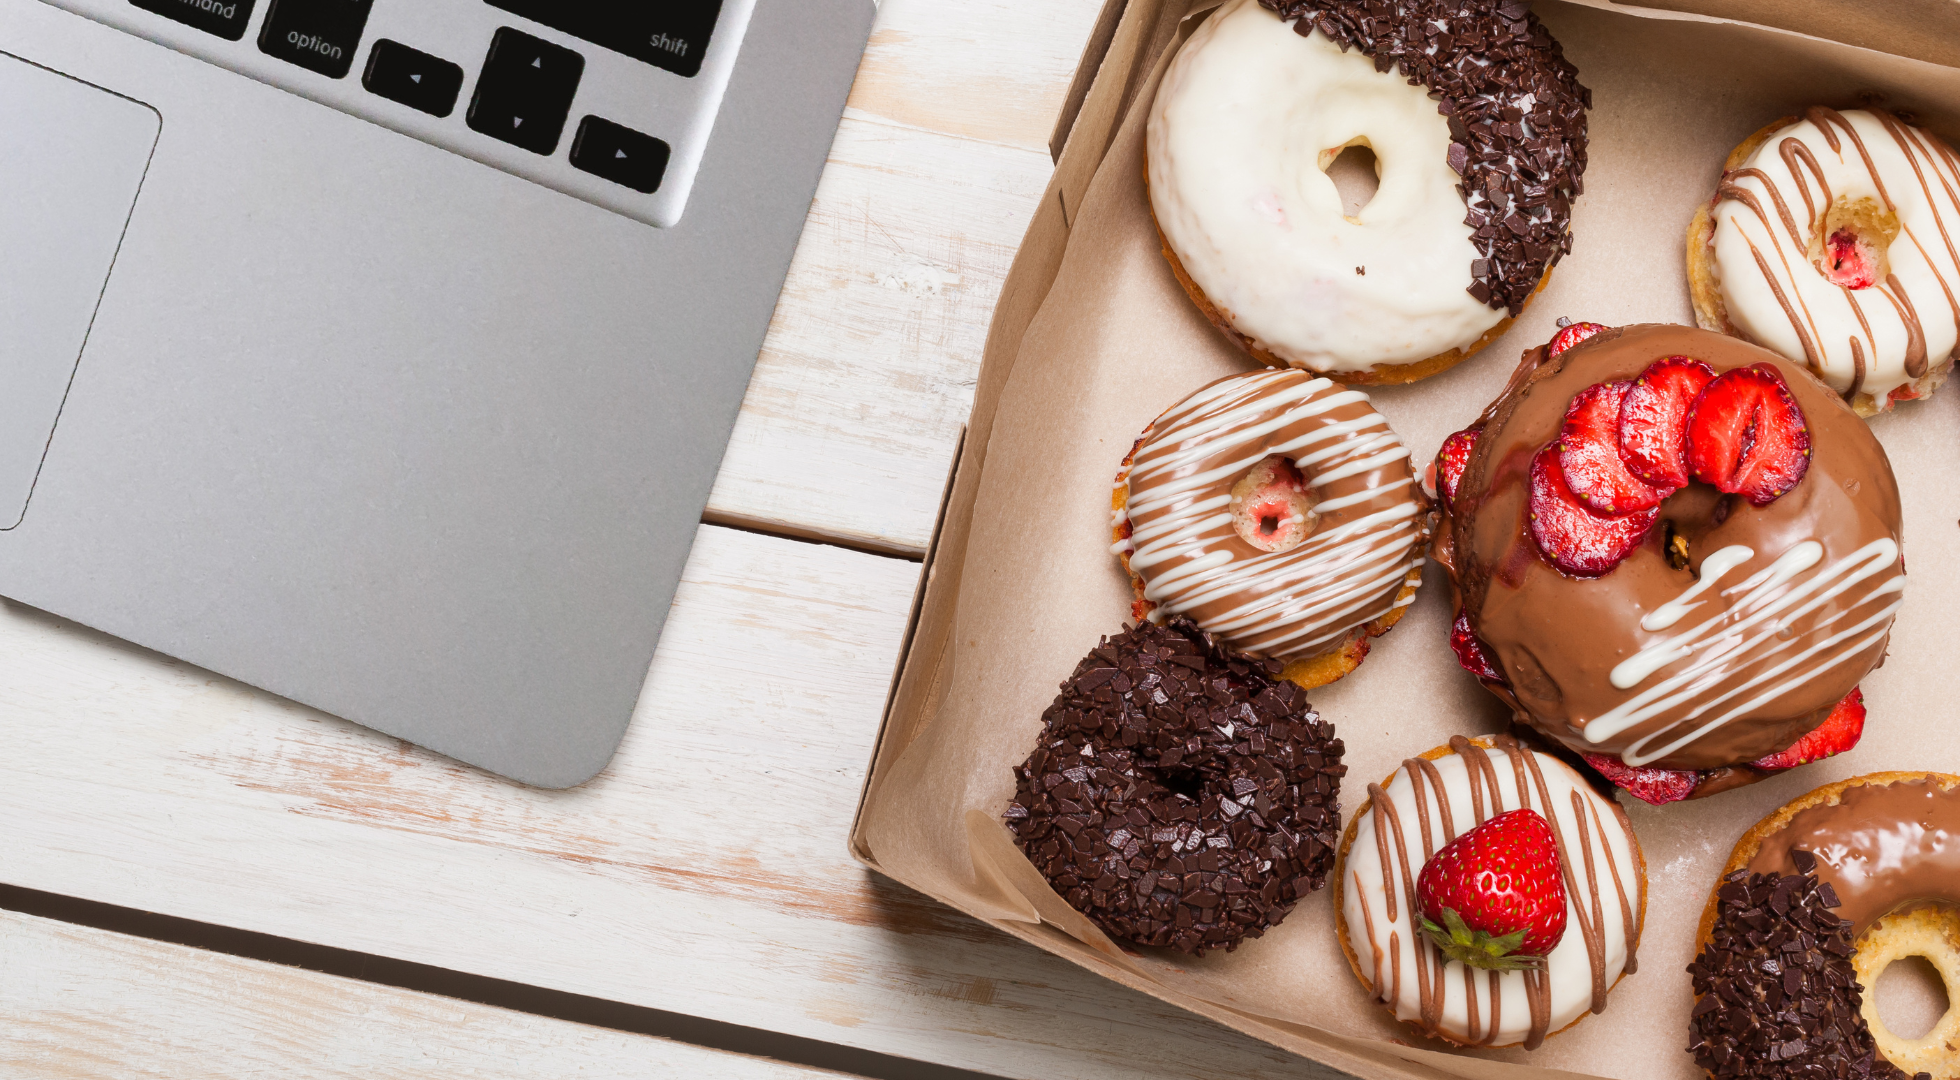 Image of donuts next to a computer used to showcase how the Sugar Coin Academy is a business academy for bakers and sweet treat makers.